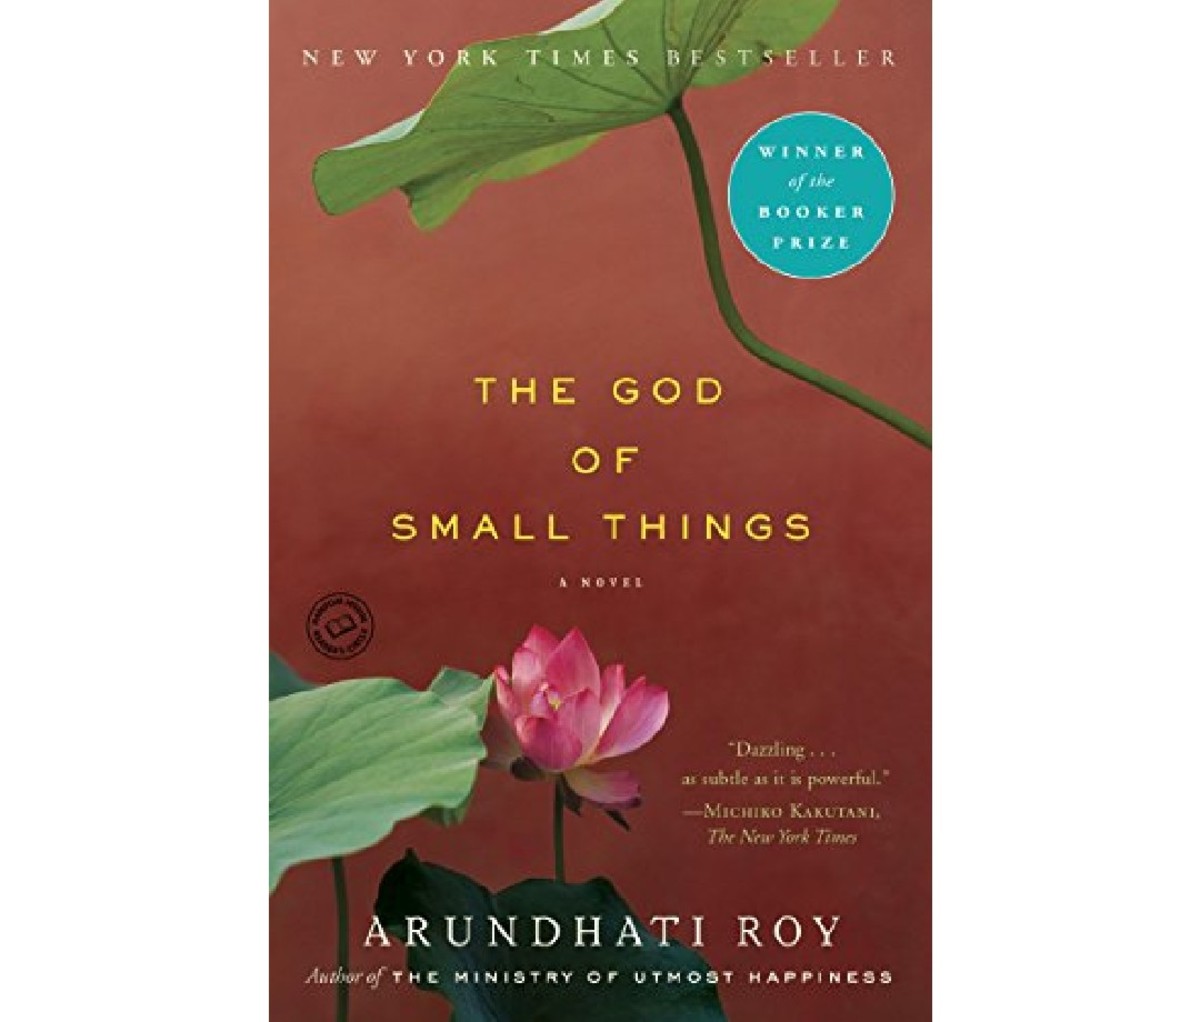 The God of Small Things by Arundhati Roy  